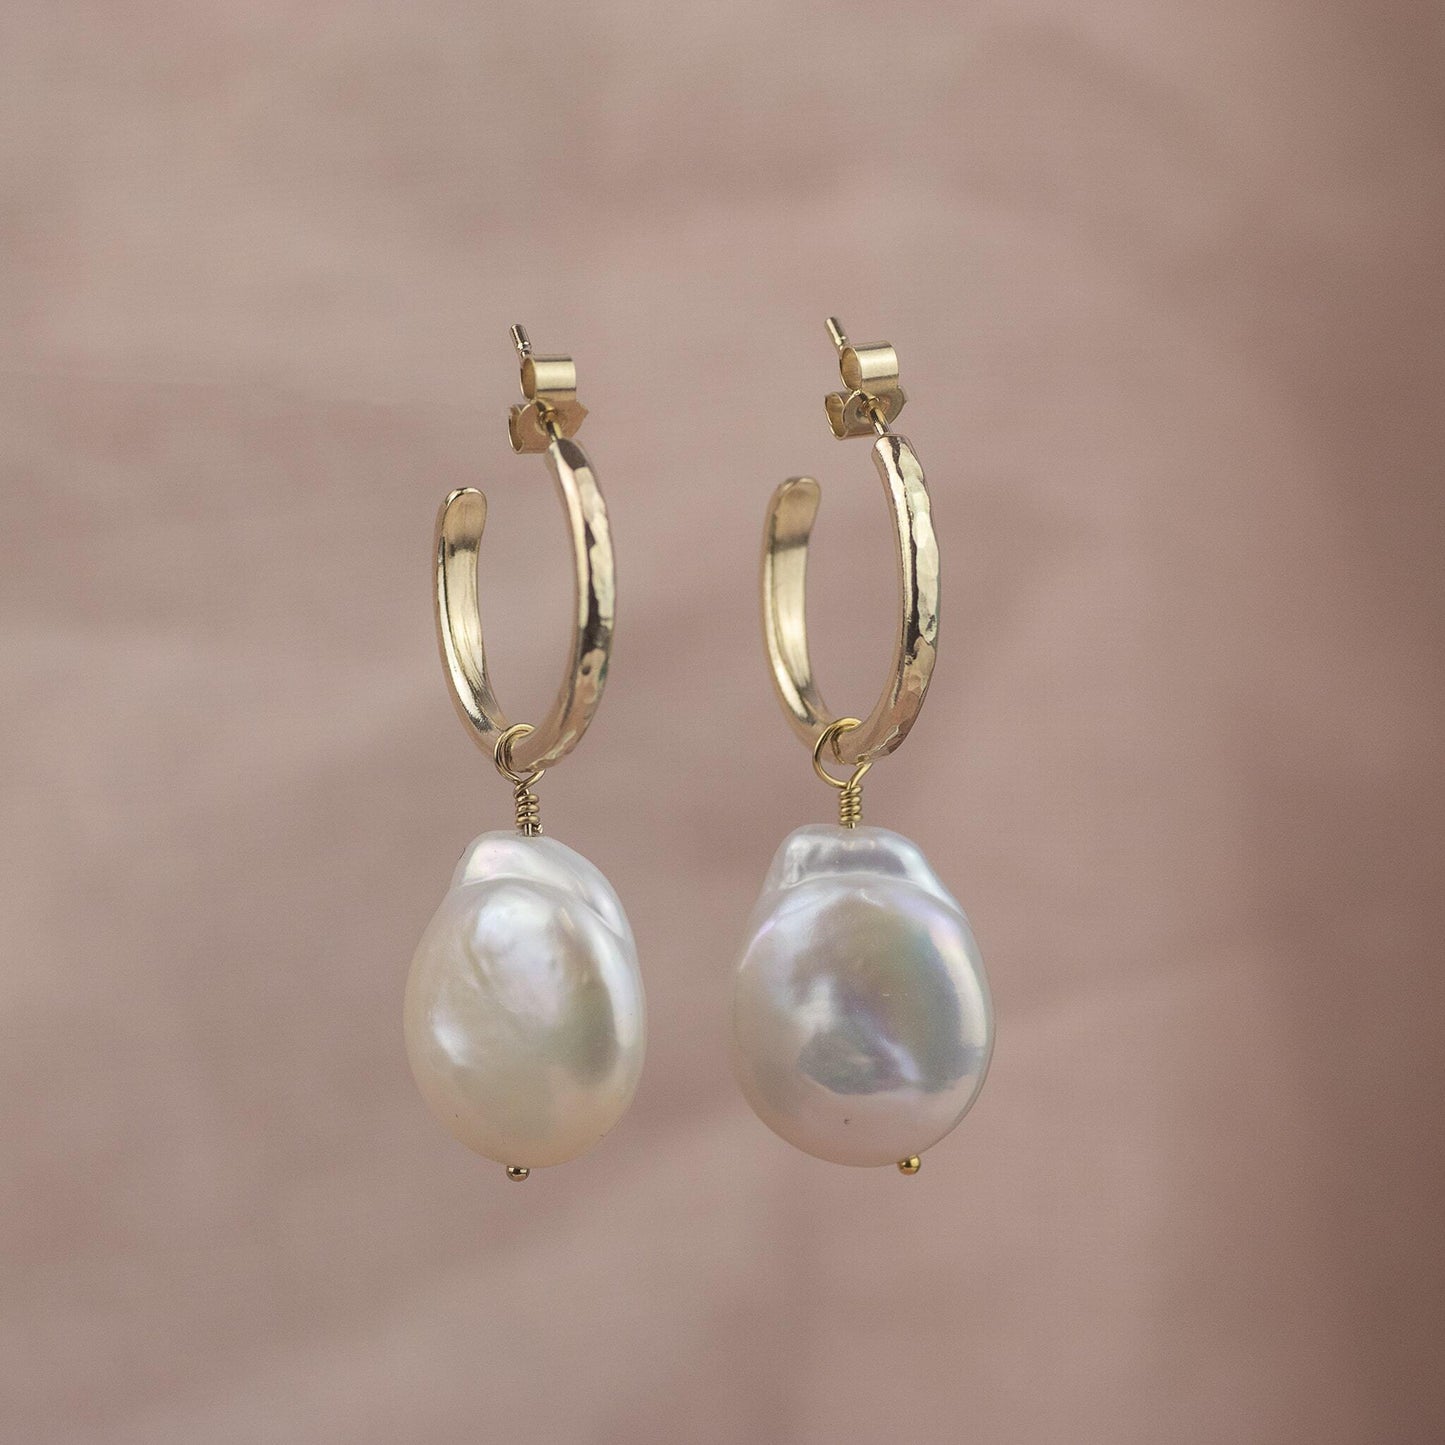 9kt Gold Extra Petite Hoops with Keishi Pearls - 1.5cm